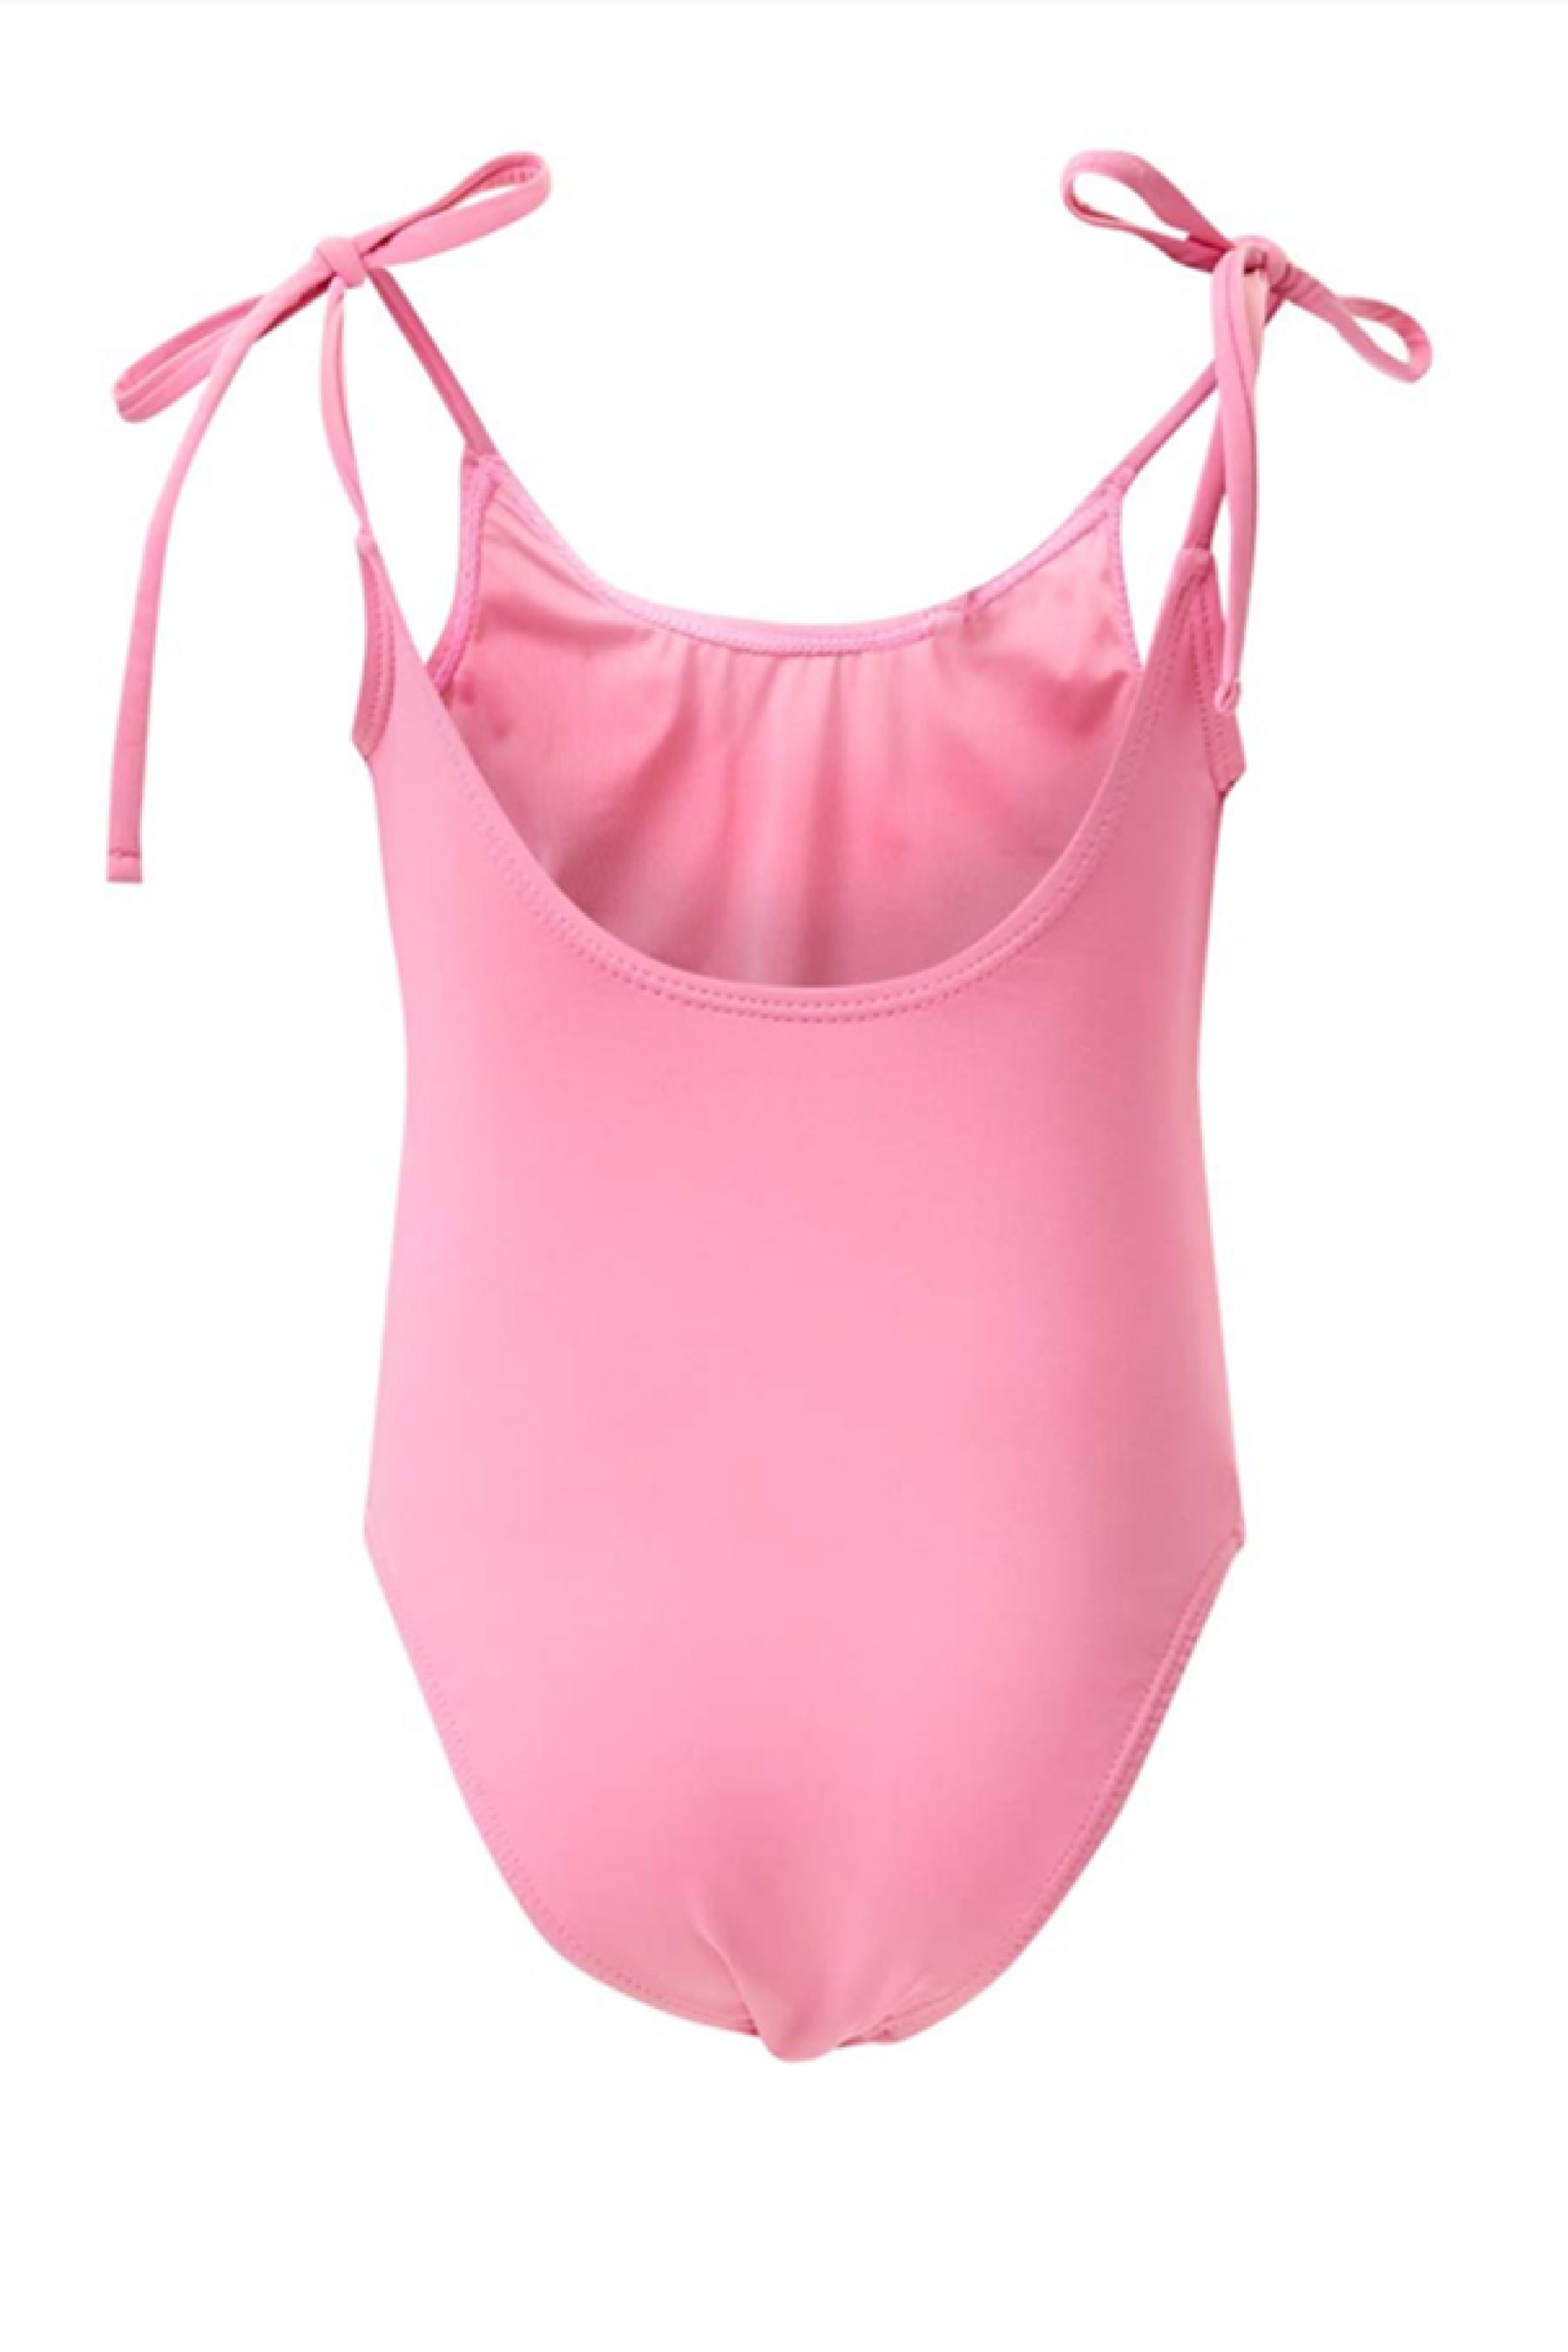 Kid's Adorable Pink Tie-Strap One-Piece